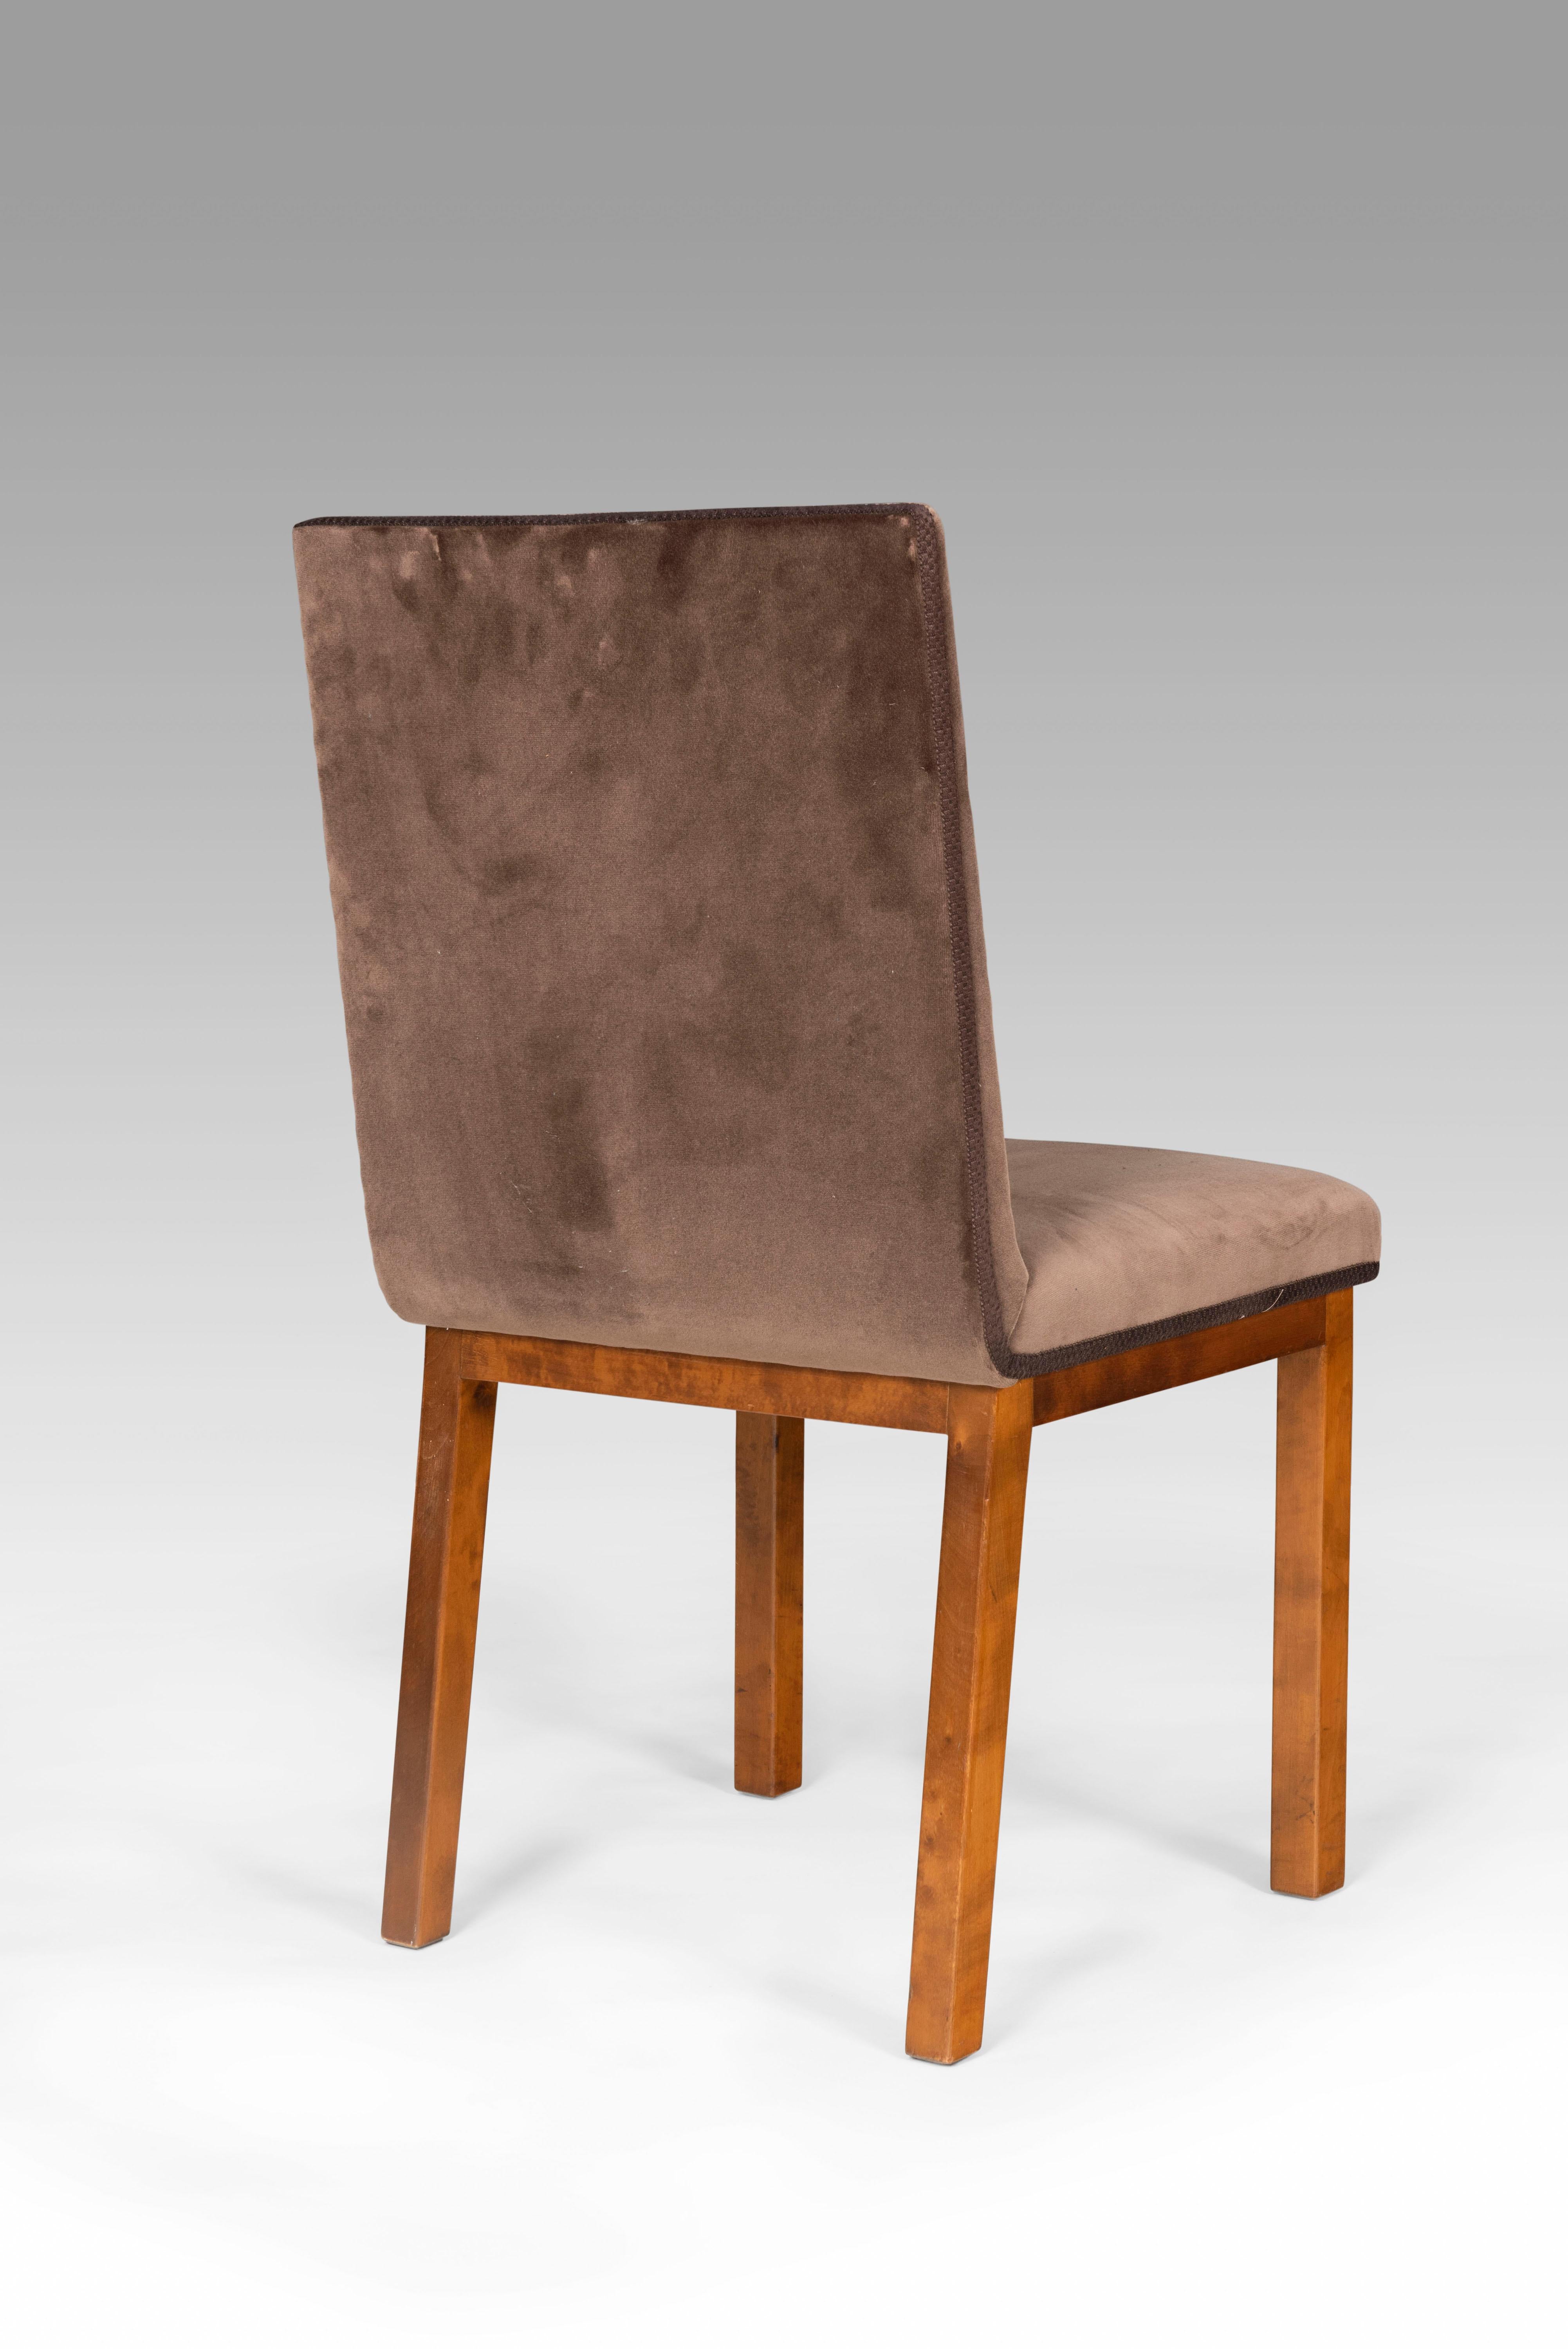 Set of 4 chairs reupholstered in Velvet. Designed during Axel Einar Hjorth's Swedish Grace period or the equivalent of Swedish Art Deco. The desing is called Corall. Made for Nordiska Kompaniet. Plaque underneath chair with number R37774-C1712 34.